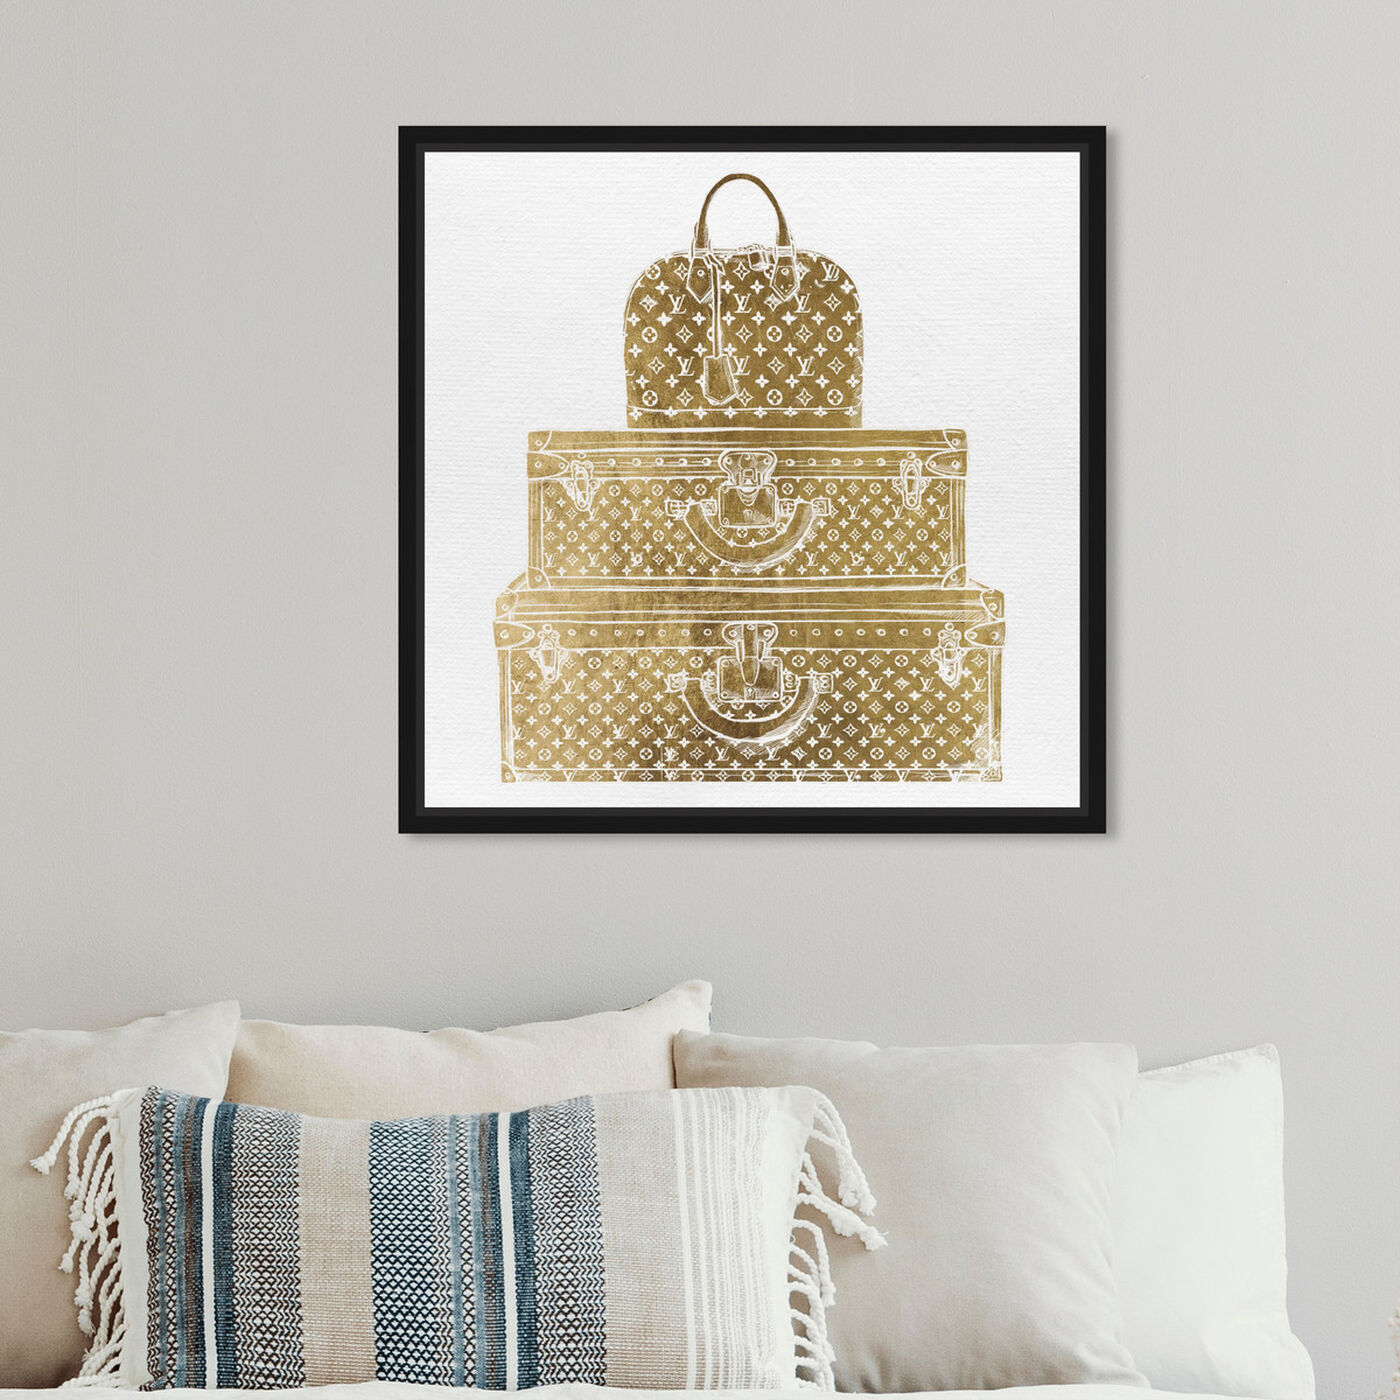 Oliver Gal 'Royal Bag and Luggage Gold diecut' Fashion and Glam